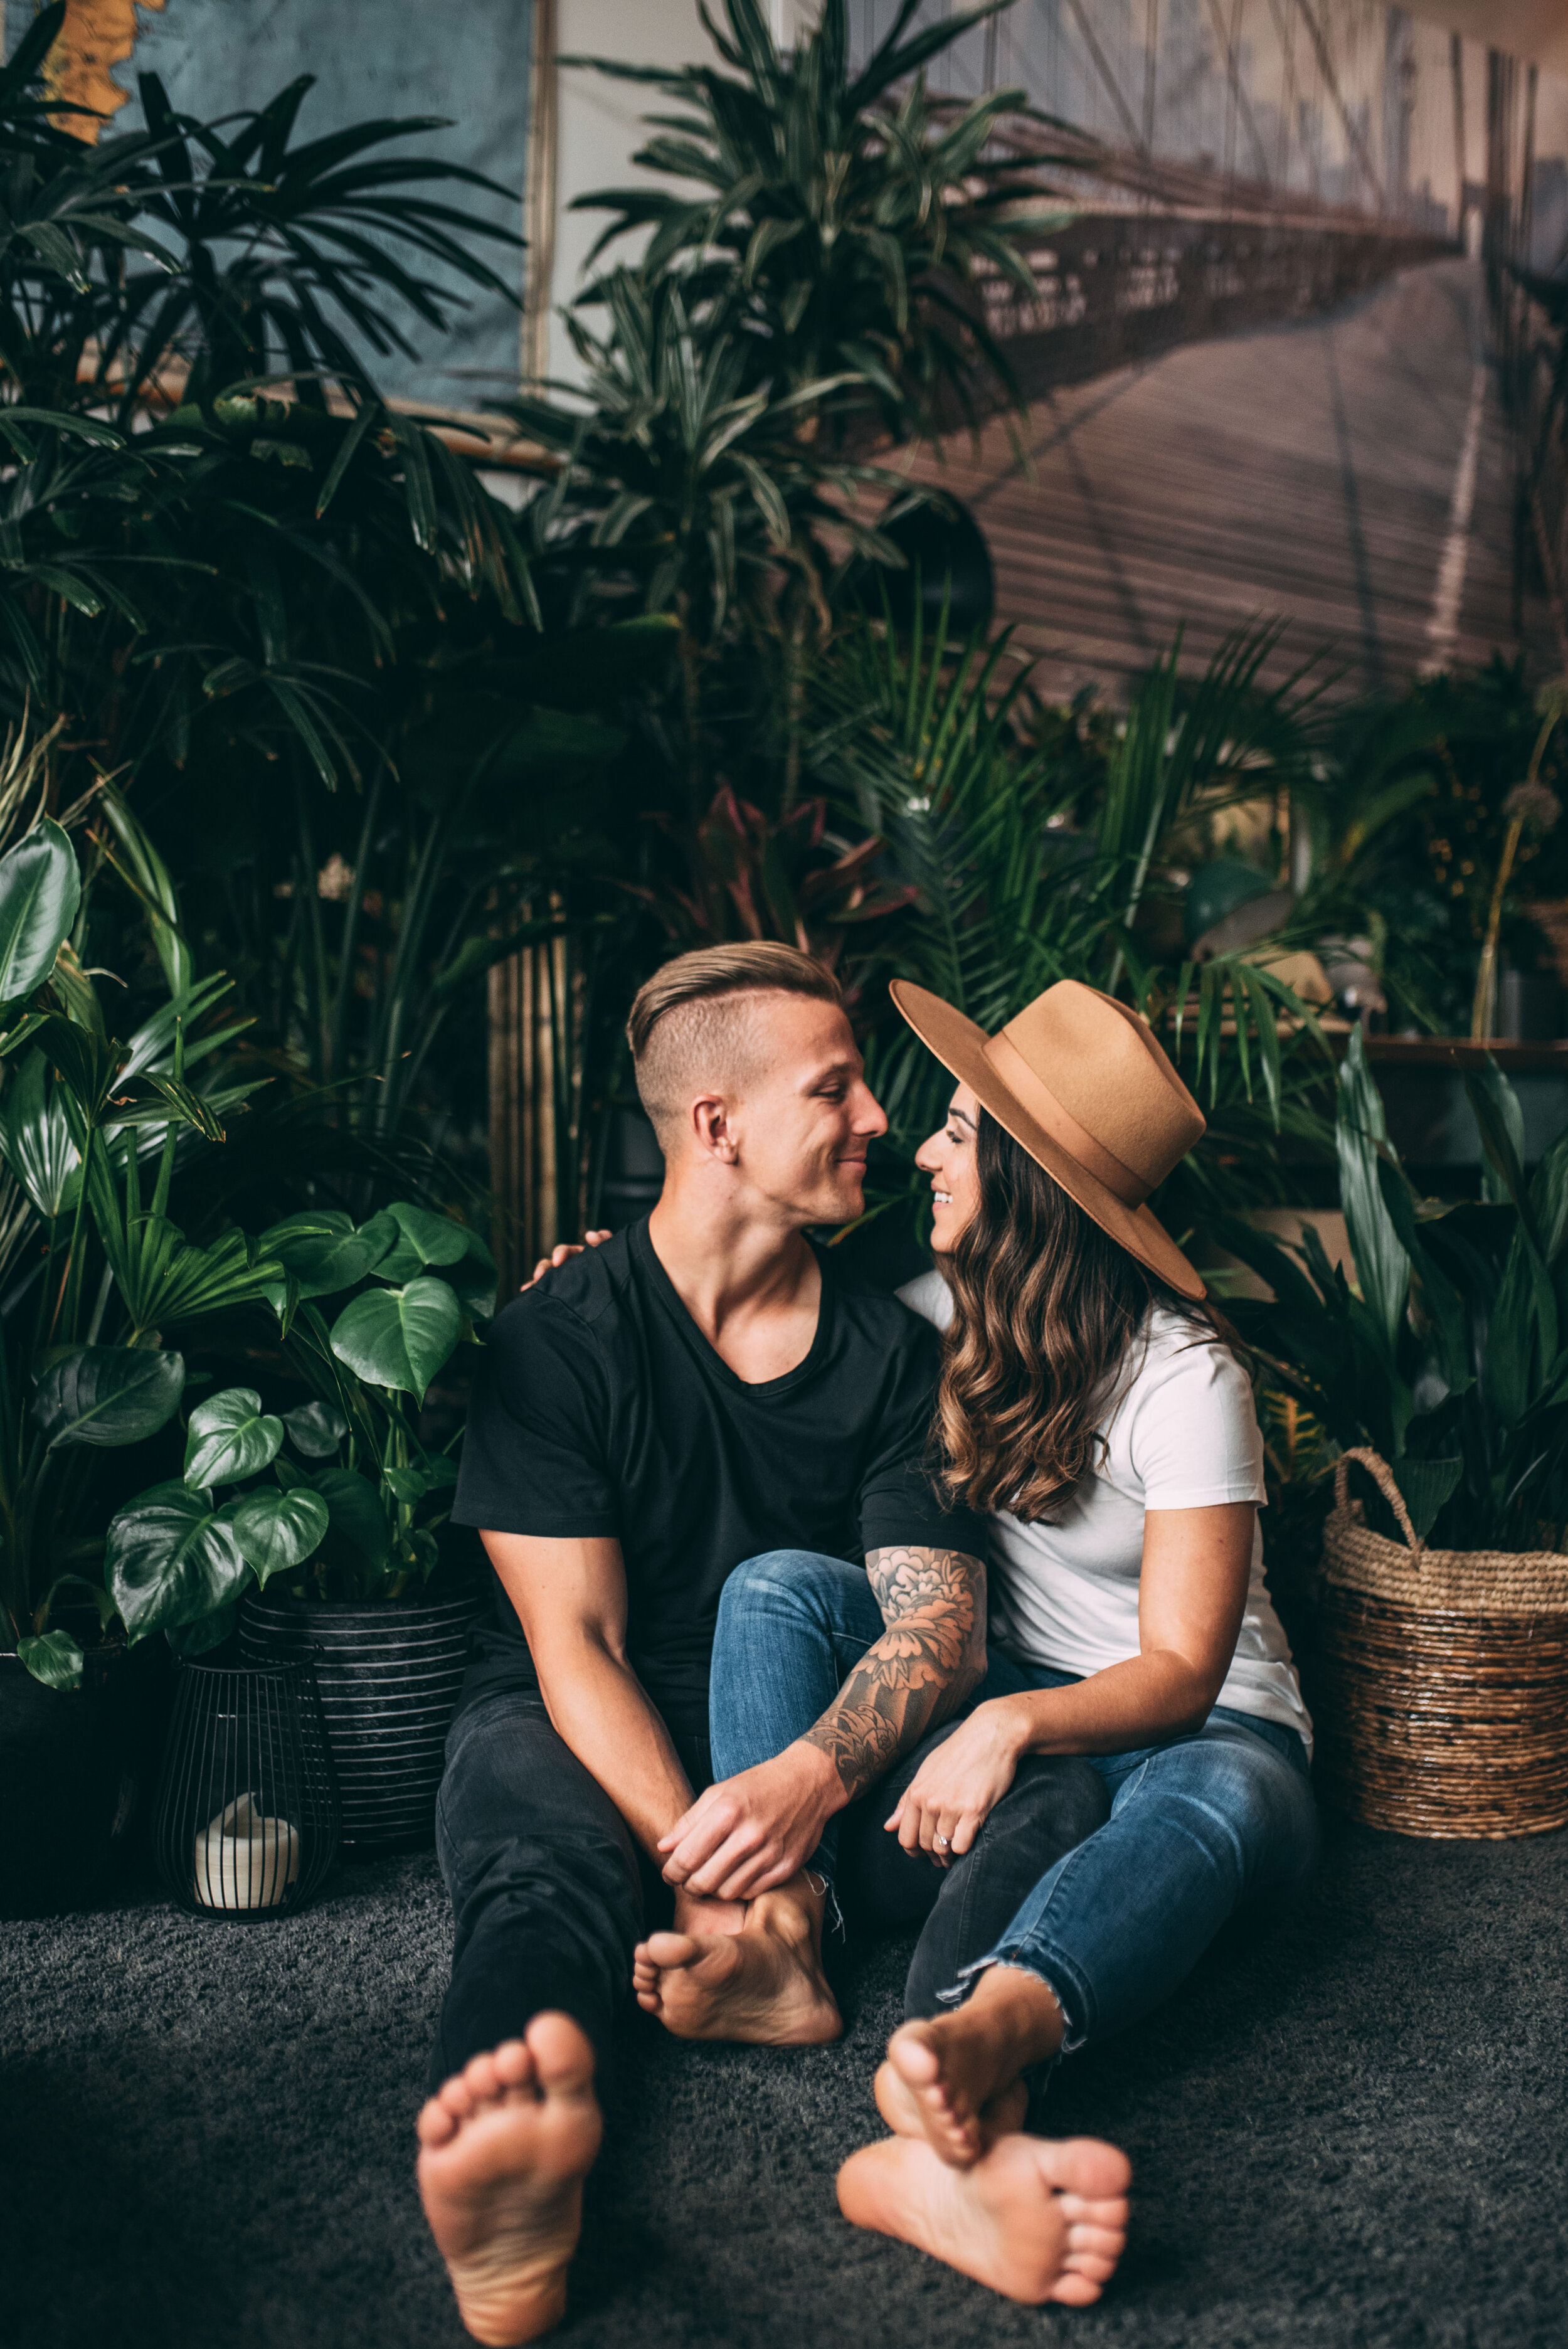 Vancouver Engagement Session - In Home Couples Session - Loft Garden Oasis - Laura Olson Photography - Sunshine Coast BC & Vancouver Wedding & Elopement Photographer8041.jpg